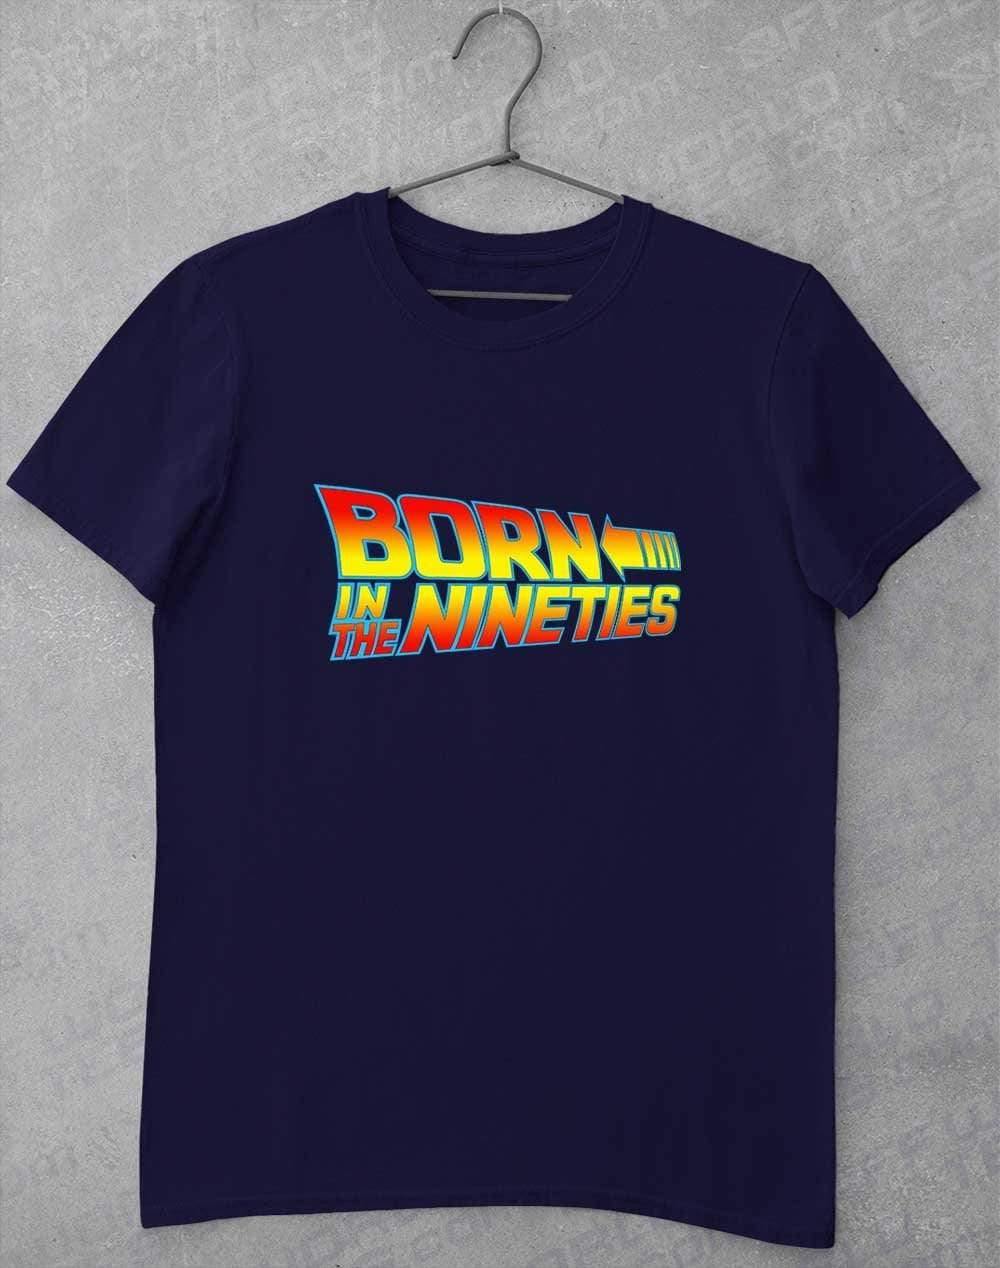 Born in the... (CHOOSE YOUR DECADE!) T-shirt THE NINETIES - Navy / S  - Off World Tees